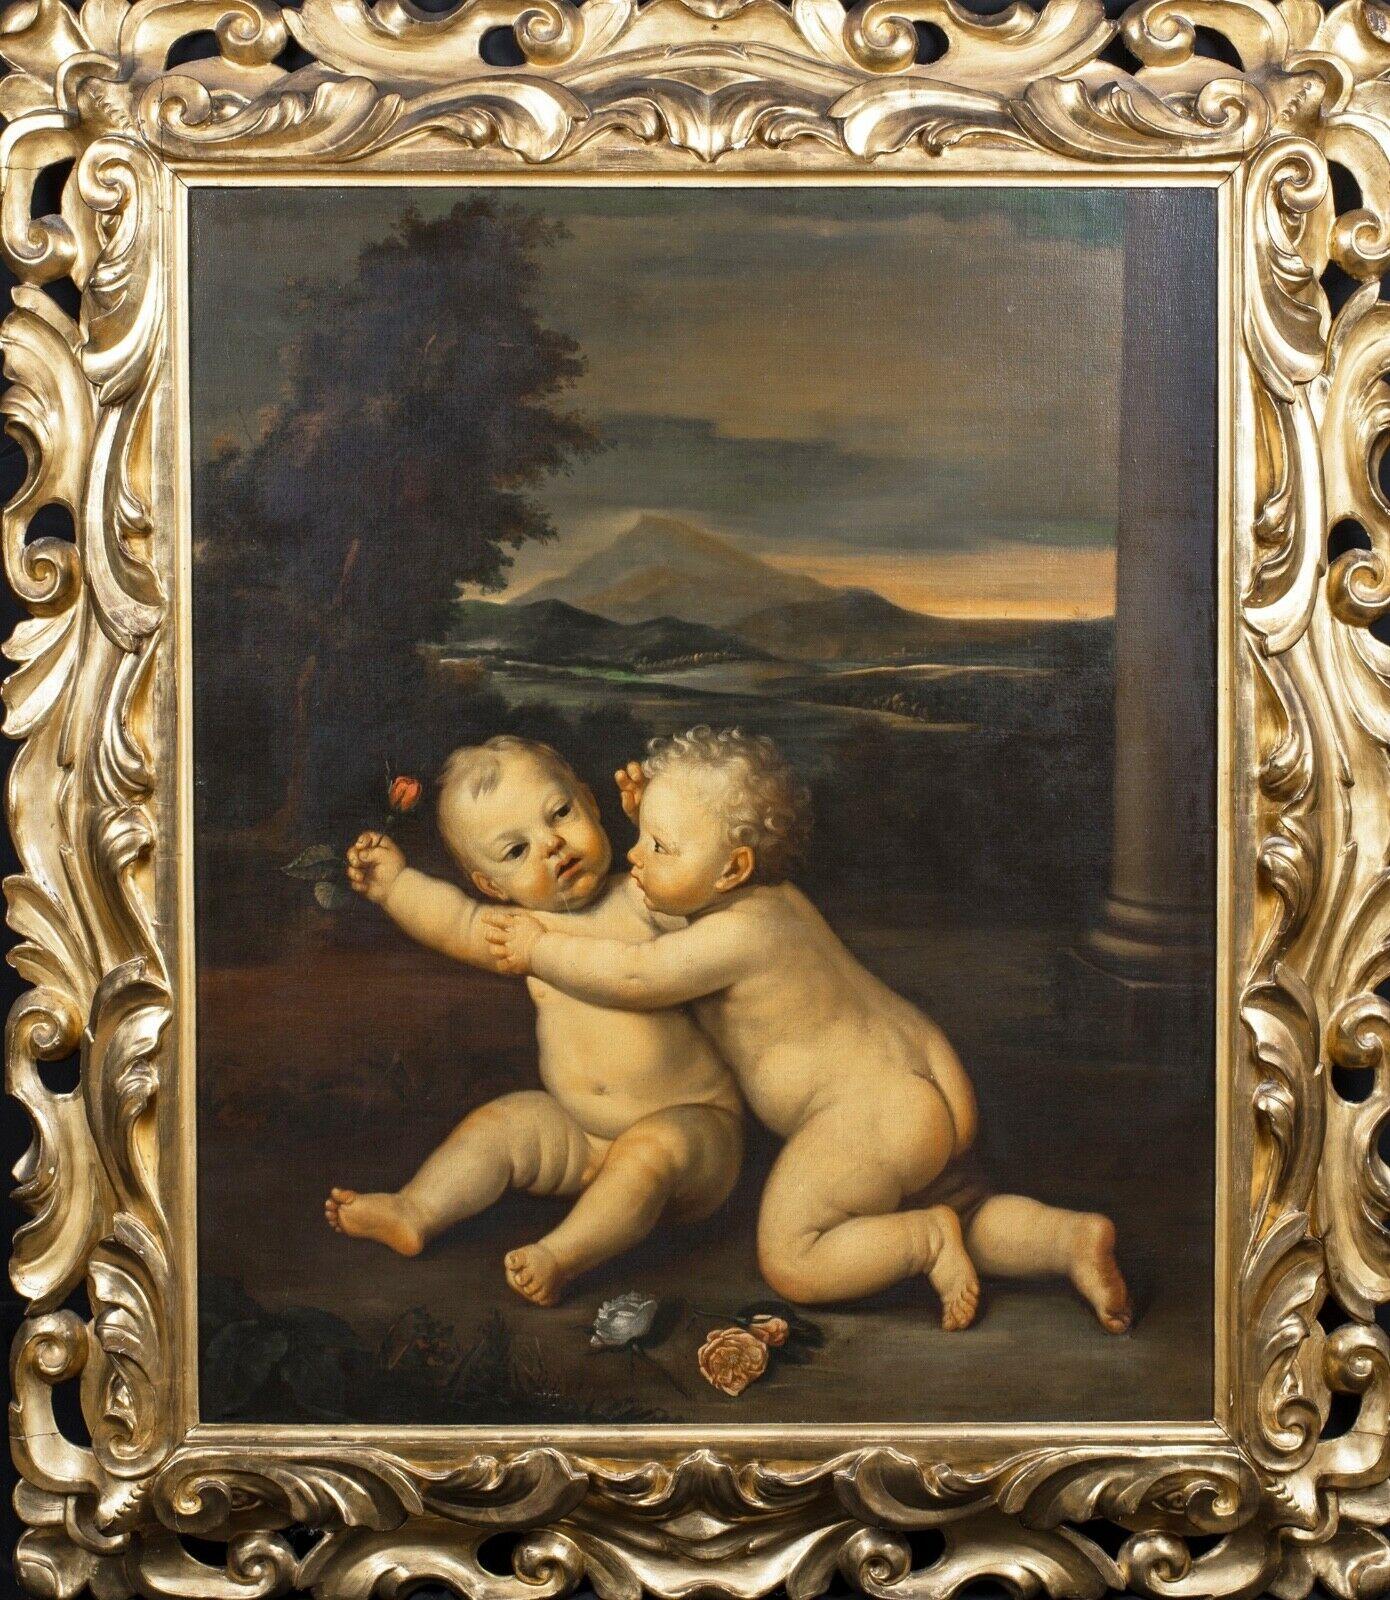 Unknown Portrait Painting - Putto Playing, 19th Century Bolognese School - Huge Work